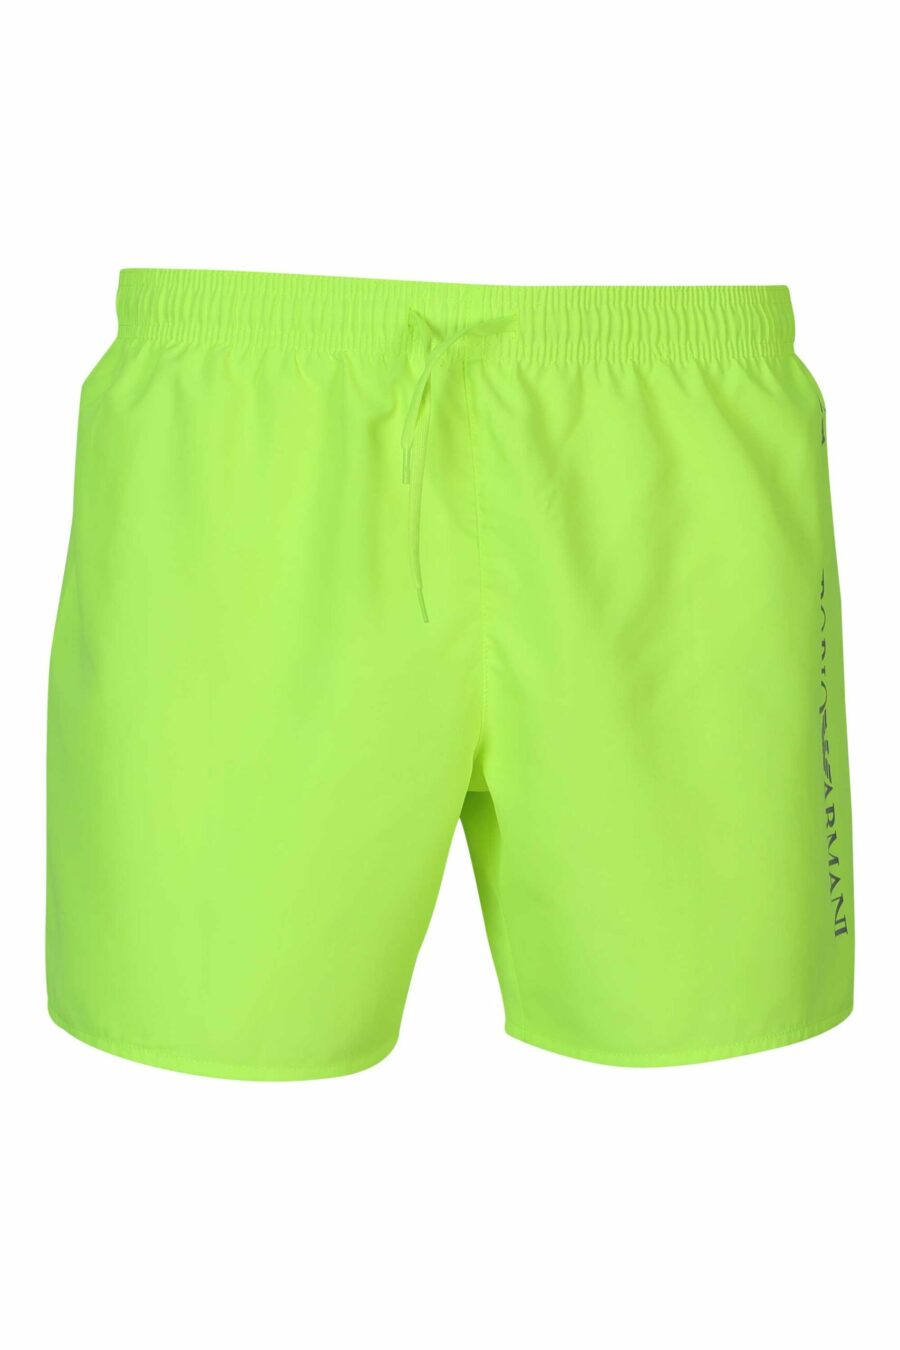 Neon green swimming costume with vertical side "lux identity" logo - 8059972905280 scaled